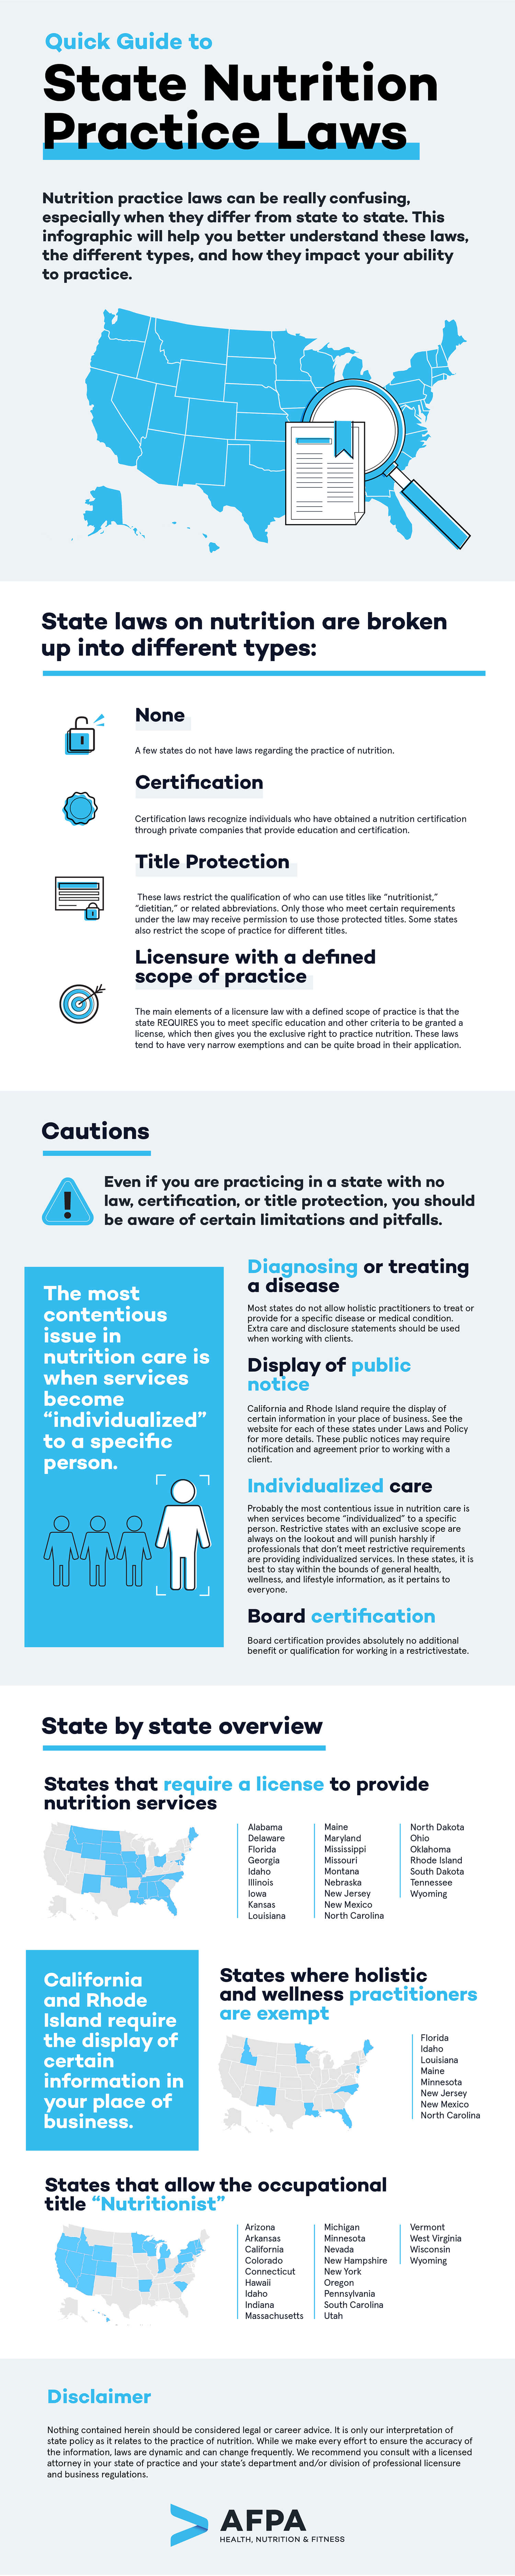 Nutrition Practice Laws